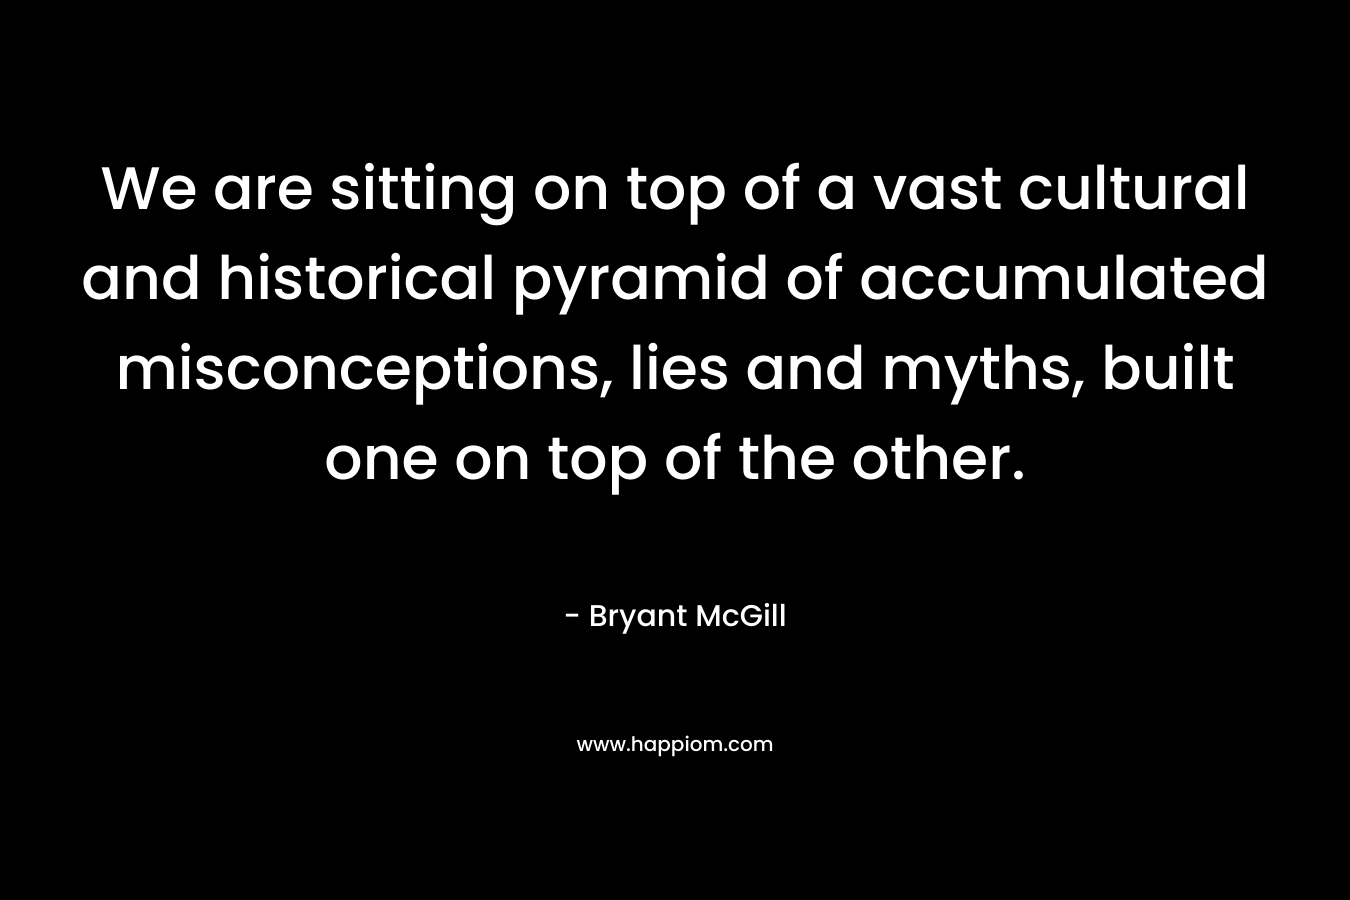 We are sitting on top of a vast cultural and historical pyramid of accumulated misconceptions, lies and myths, built one on top of the other. – Bryant McGill